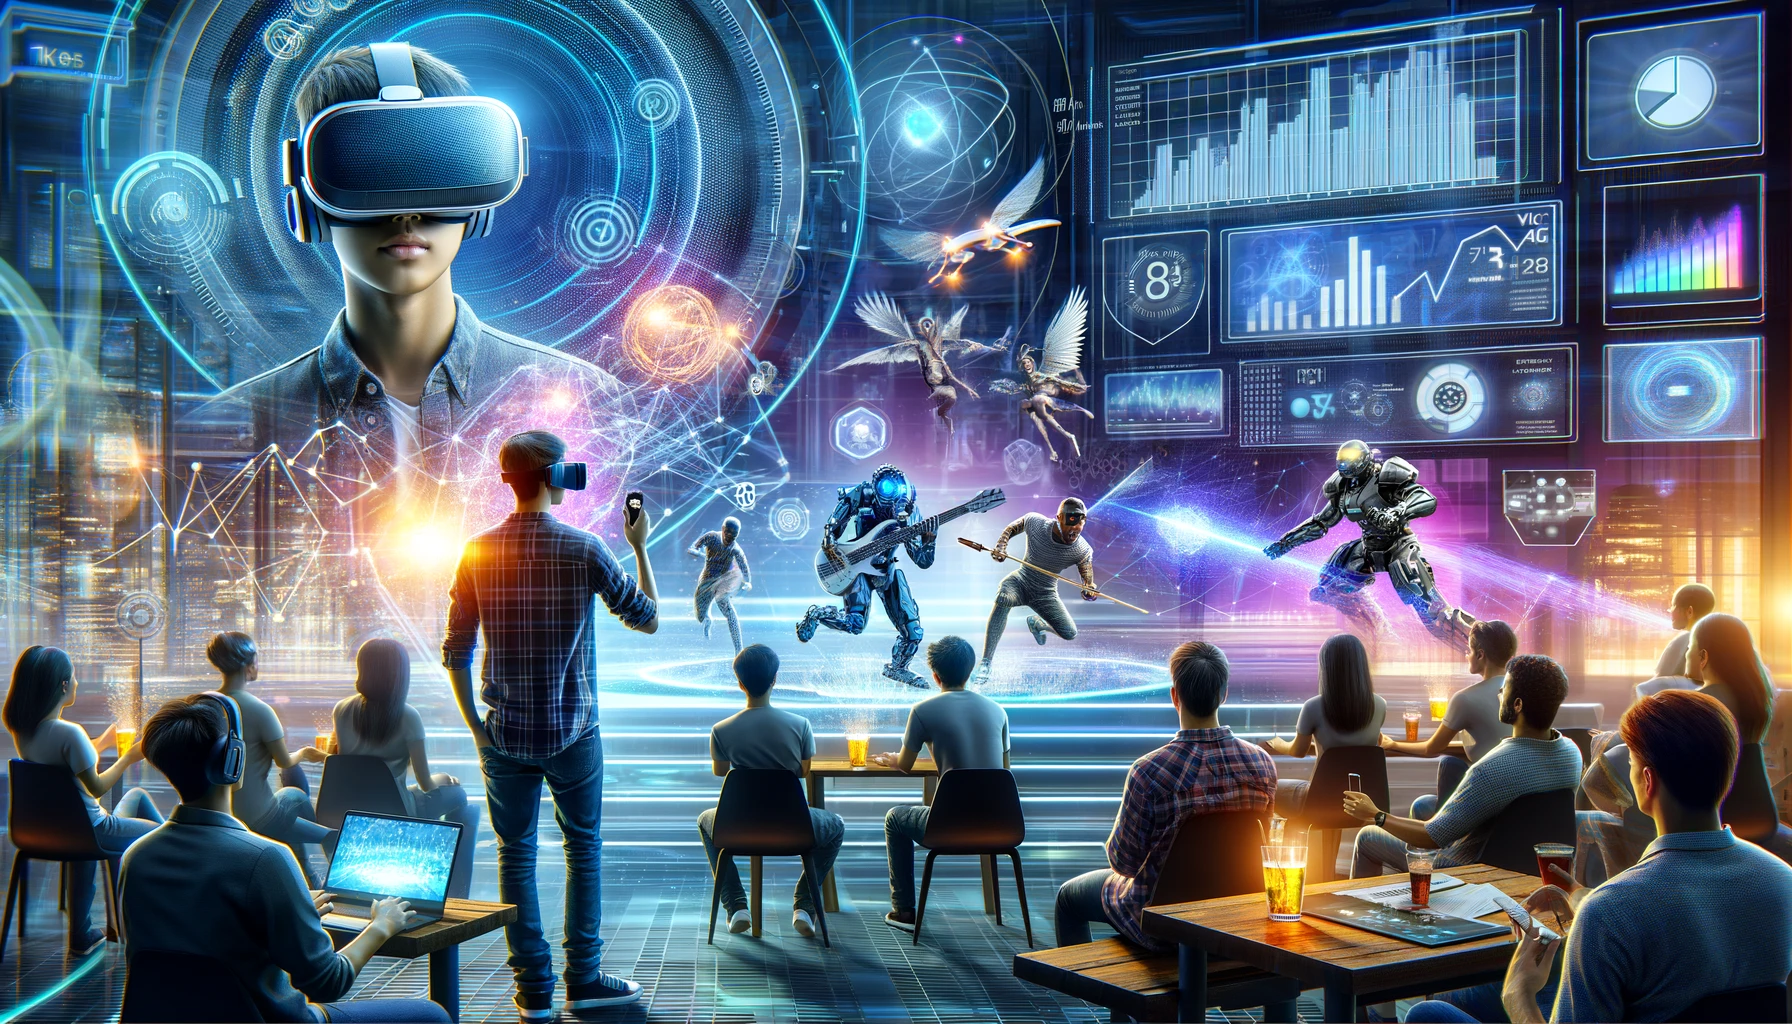 A diverse group using various digital entertainment technologies in a futuristic setting.